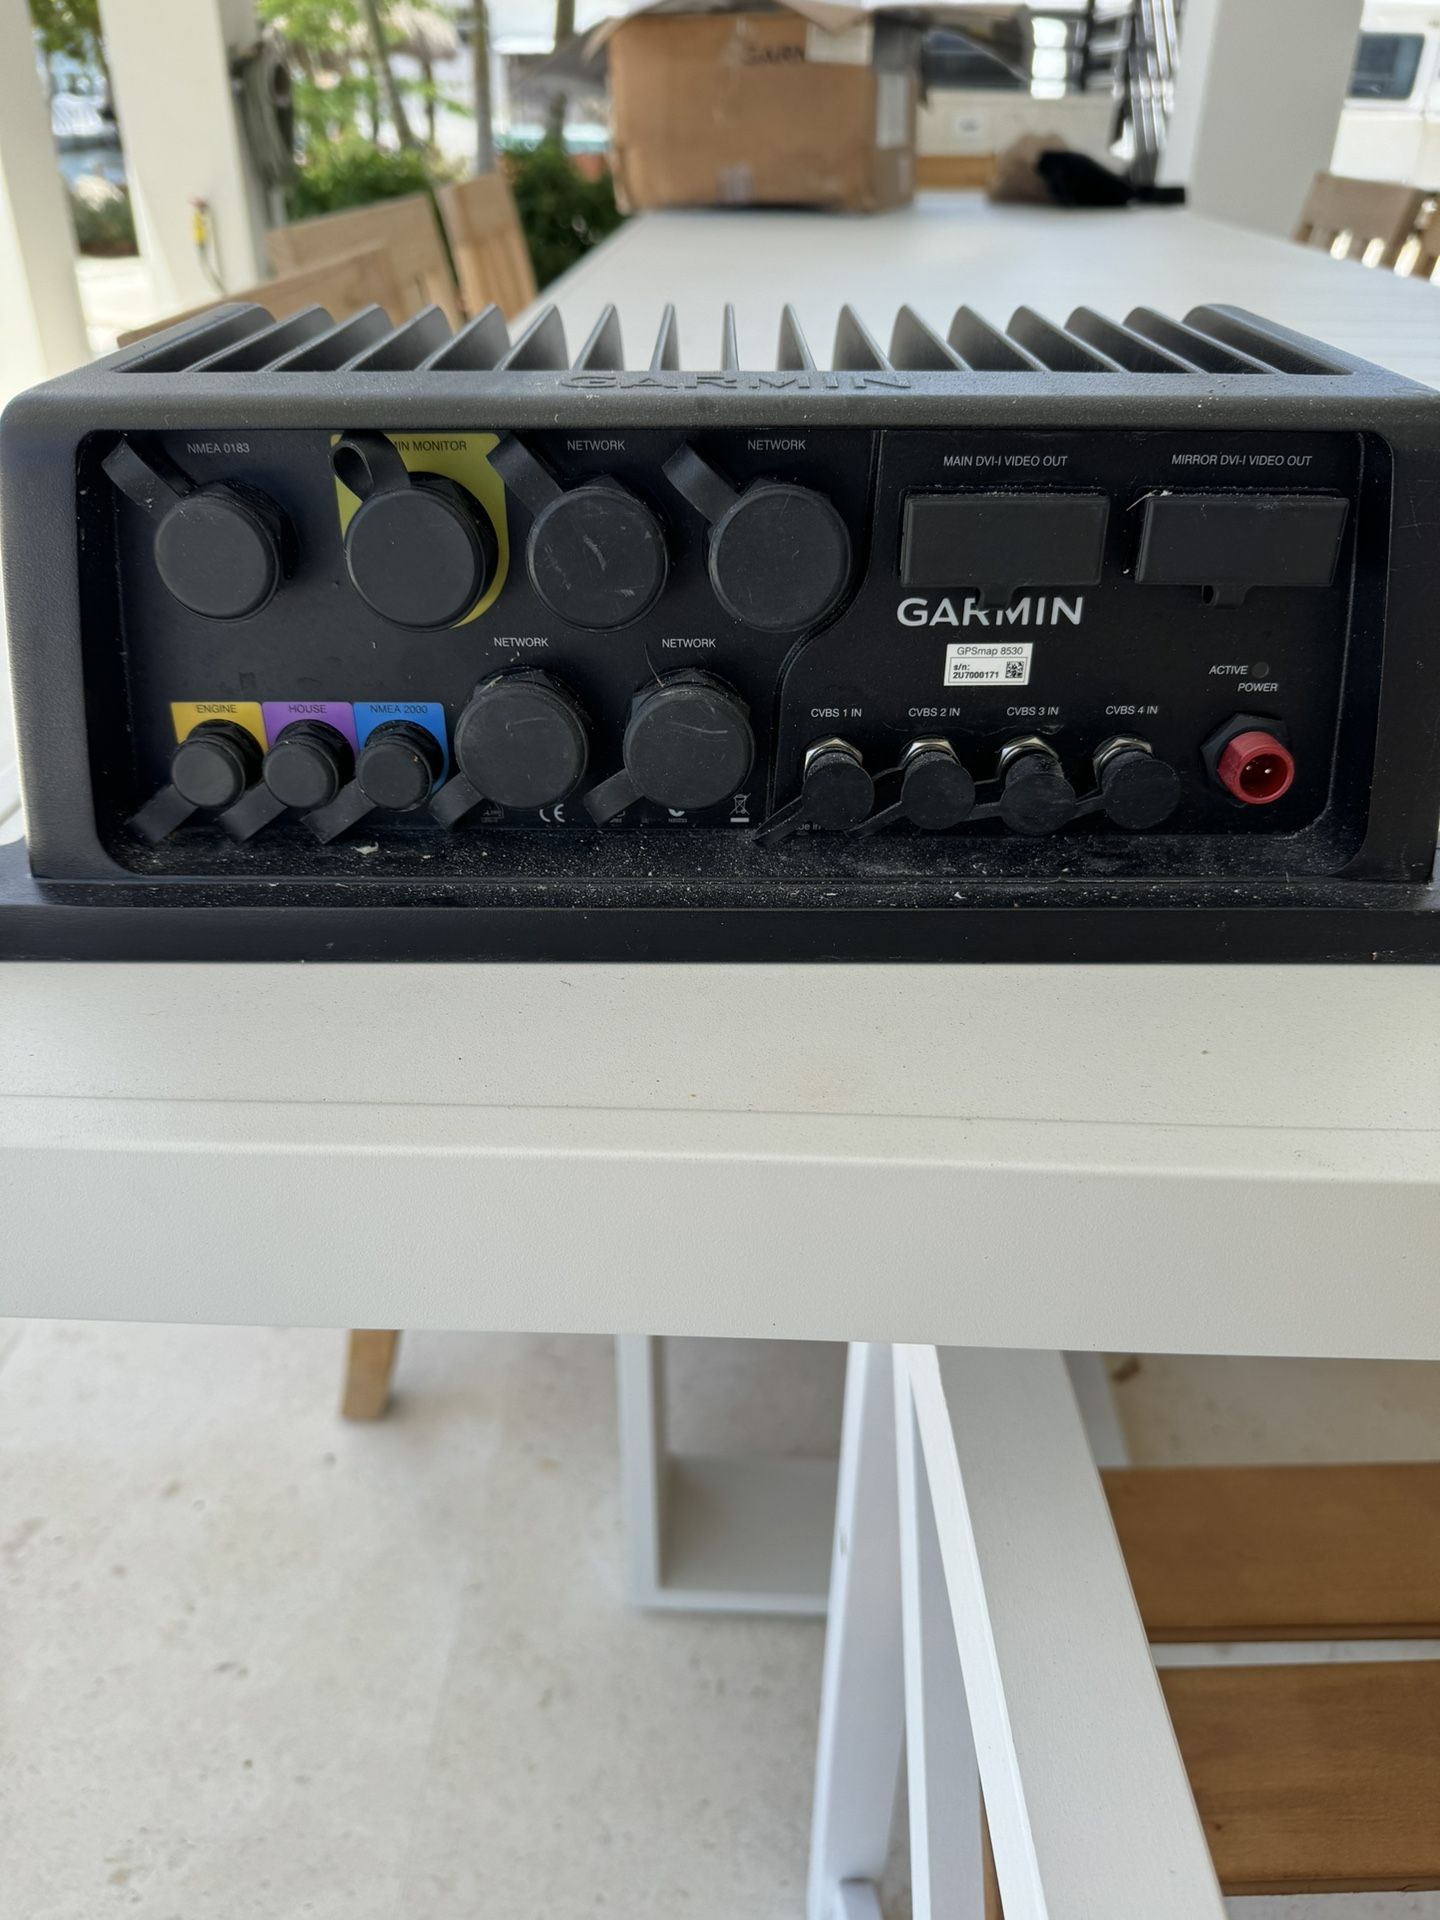 Garmin GPSmap 8530 Blackbox s/n 2U700171 With Cables For Parts